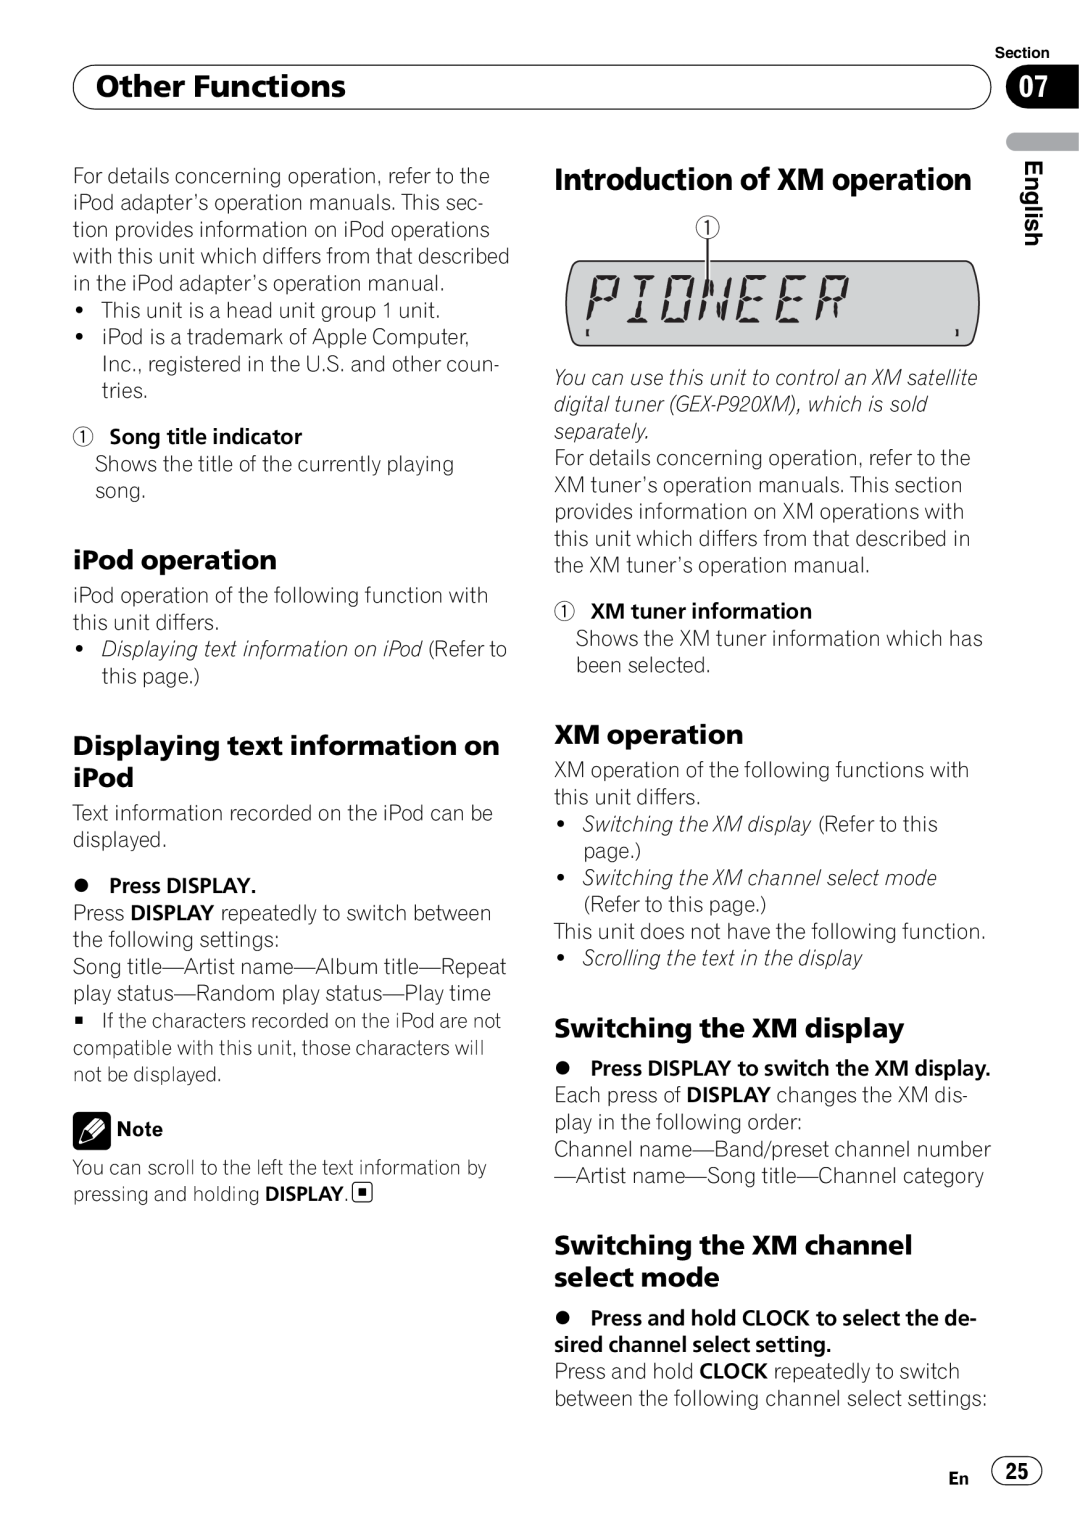 Sony DEH-P2900MP Introduction of XM operation, iPod operation, Displaying text information on iPod, Other Functions 